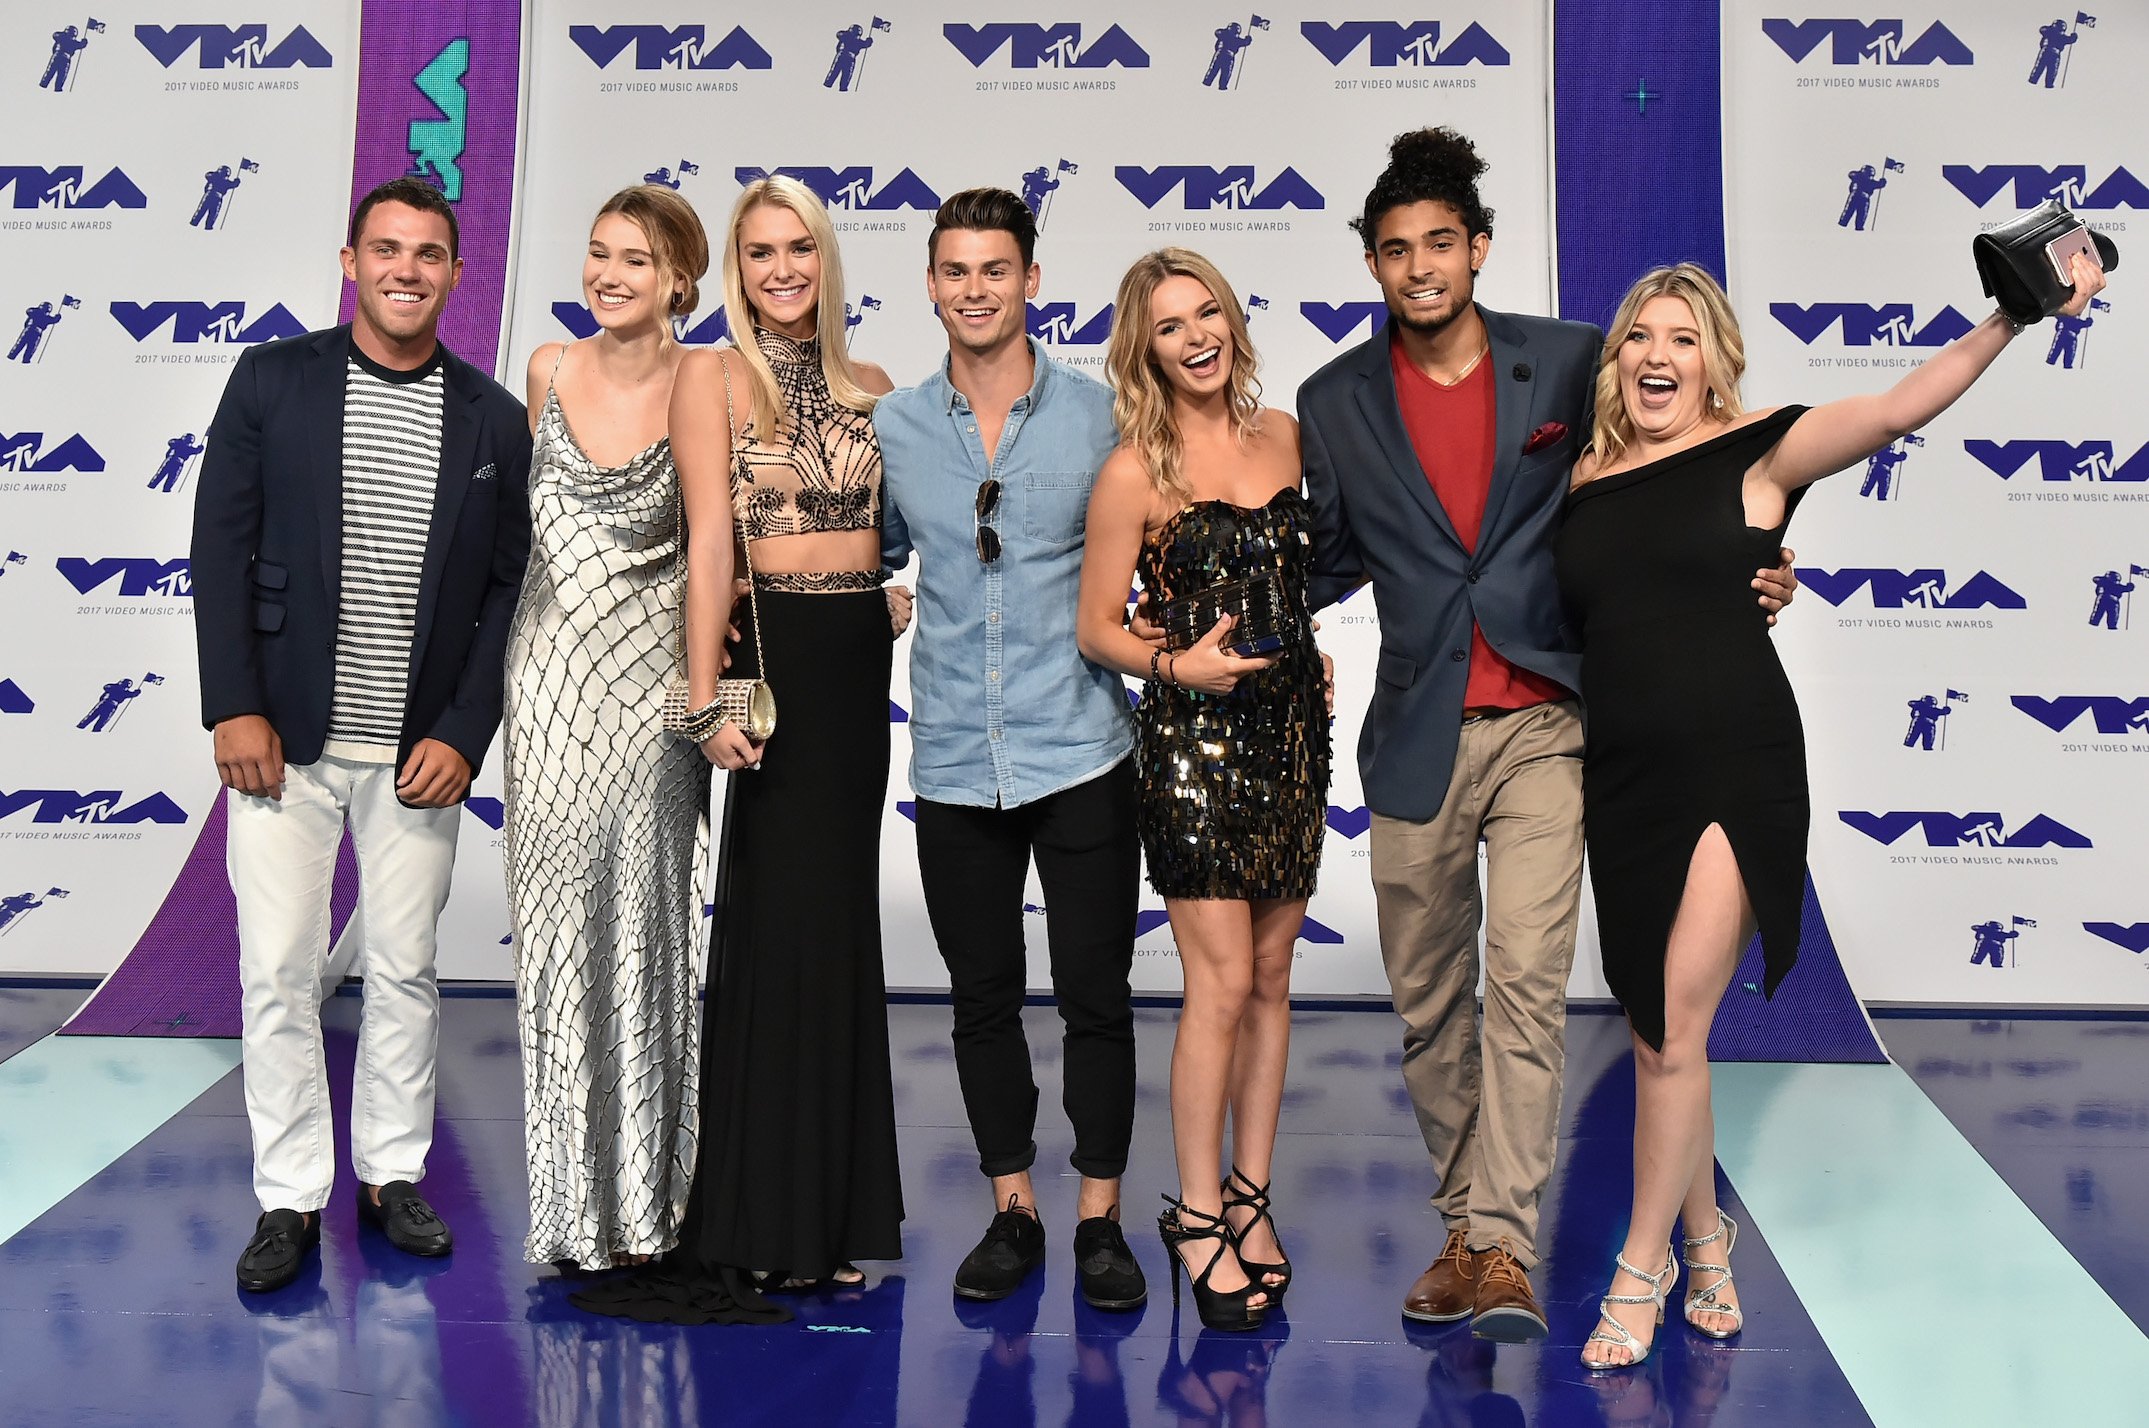 The cast of MTV's 'Siesta Key' in 2017 at the MTV Video Music Awards standing together and smiling